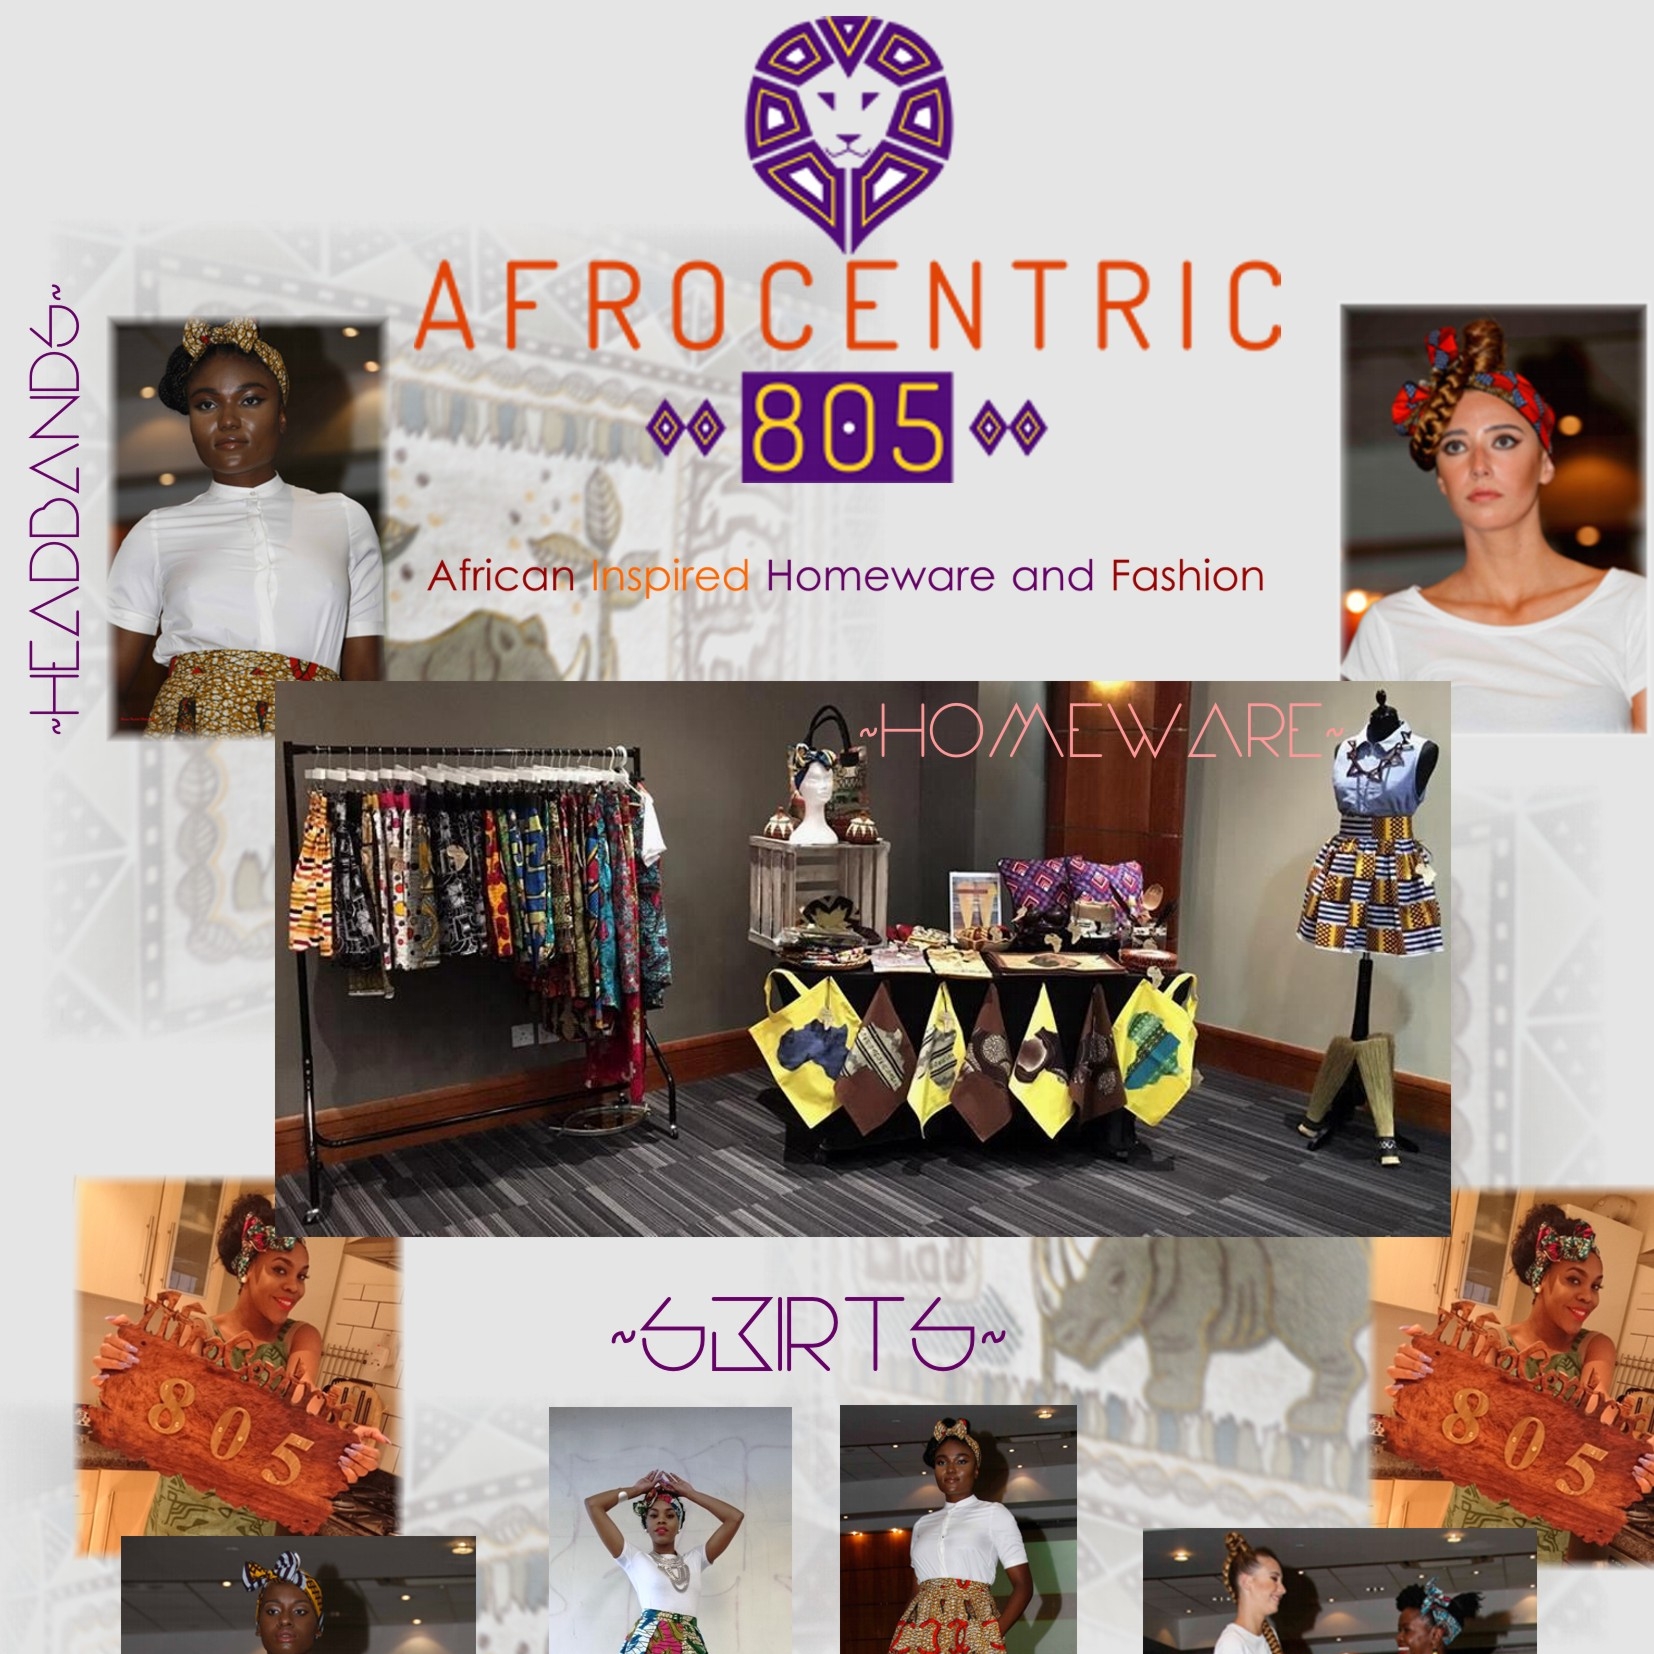 Afrocentric 805 